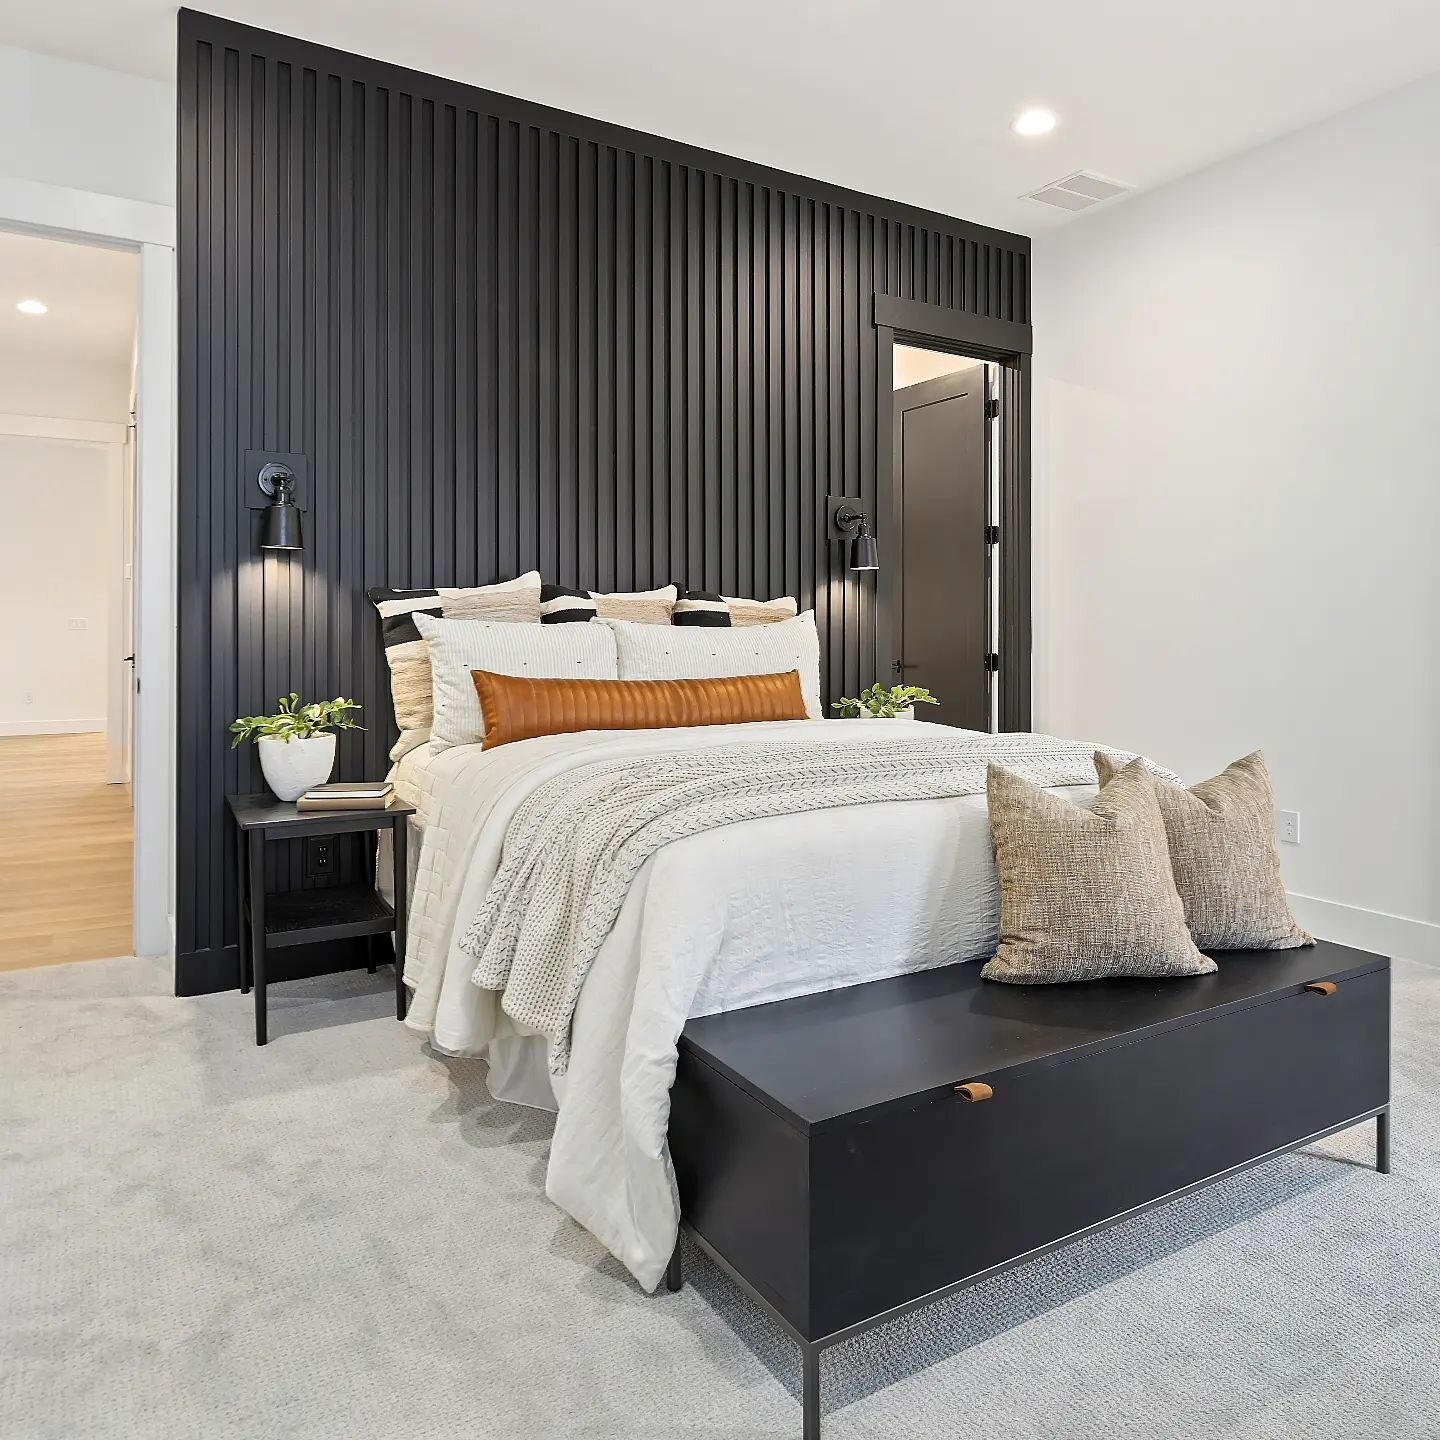 Loving this black painted wood slat accentwall in our recently completed 'Crest View' model. 🖤🖤🖤
.
.
.
.🔨 Design &amp; Build @customhomesbb
. 🛋 Home Decor @sullivanhomesstaging
. 📷 Photography @sunnyskiesmedia
.
.
.
.
.
#interiordesign #instaho